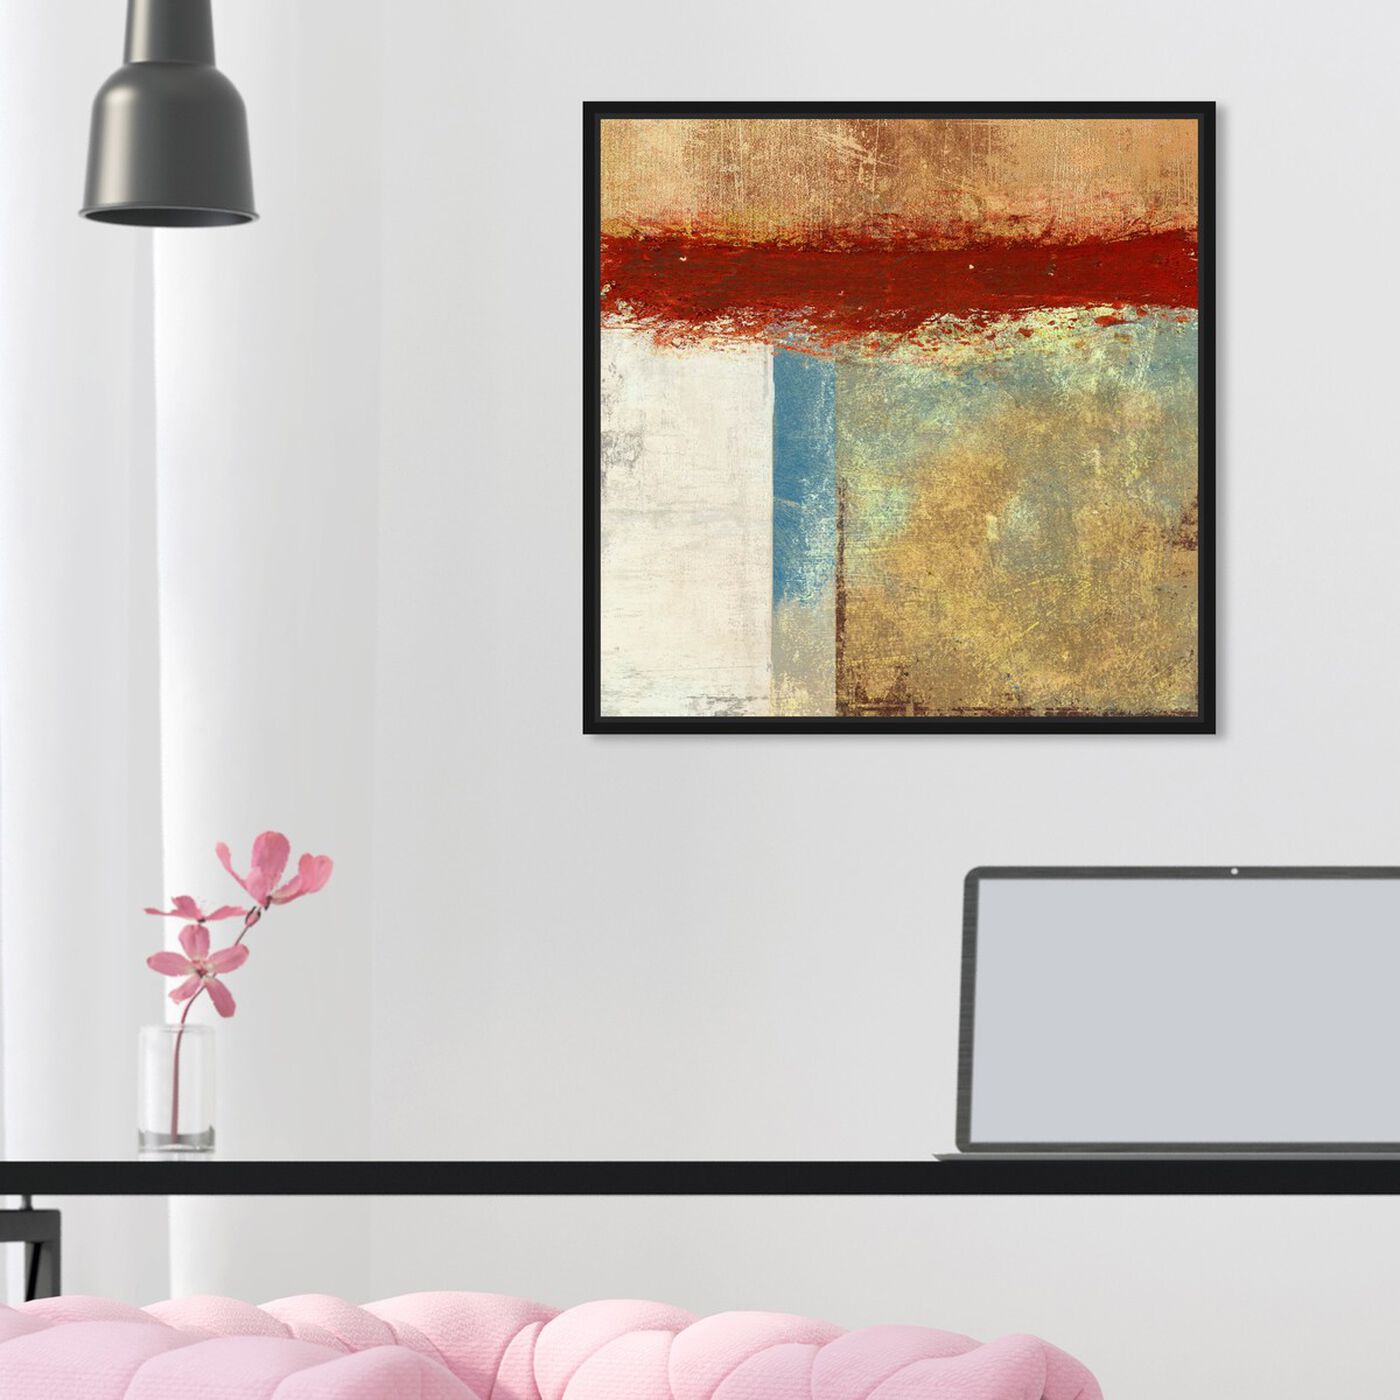 Hanging view of Sai - Paesaggio Geometrico featuring abstract and paint art.